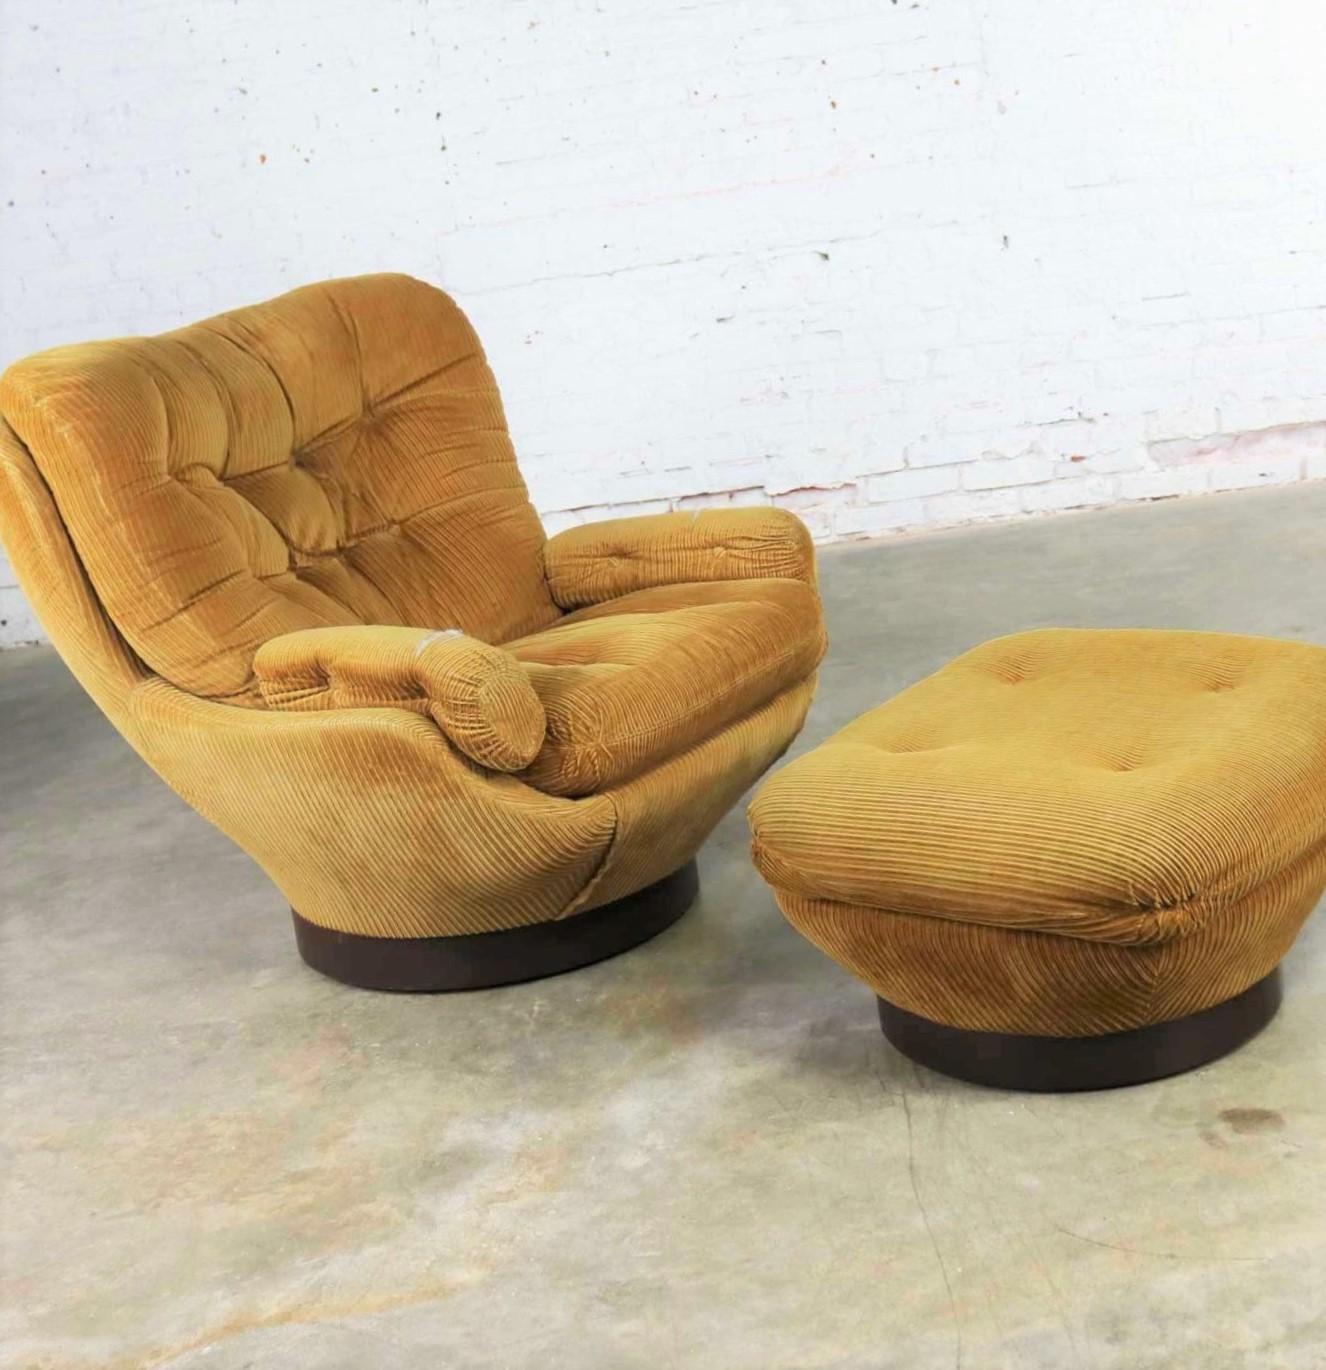 Handsome and comfortable vintage modern overstuffed swivel chair and ottoman by Selig. Done in the style of the Elda chair by Joe Columbo but an icon of its own. Selig tag under seat cushion. This pair is structurally in fabulous condition, but the